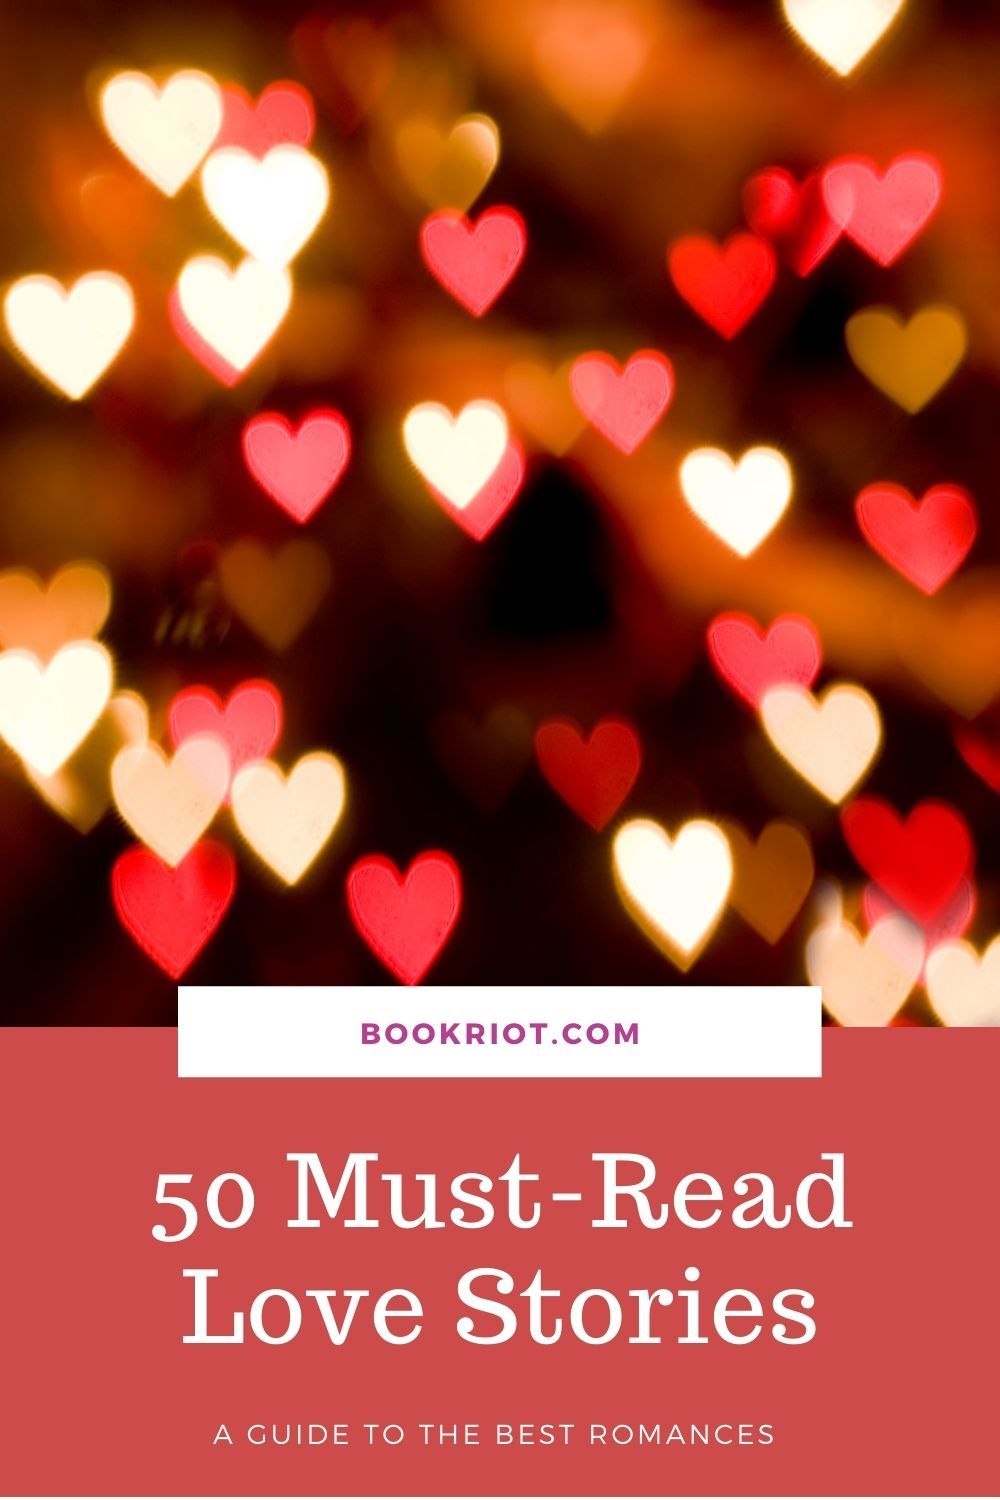 Best Love Story Books A Guide to 50 MustRead Romances Book Riot